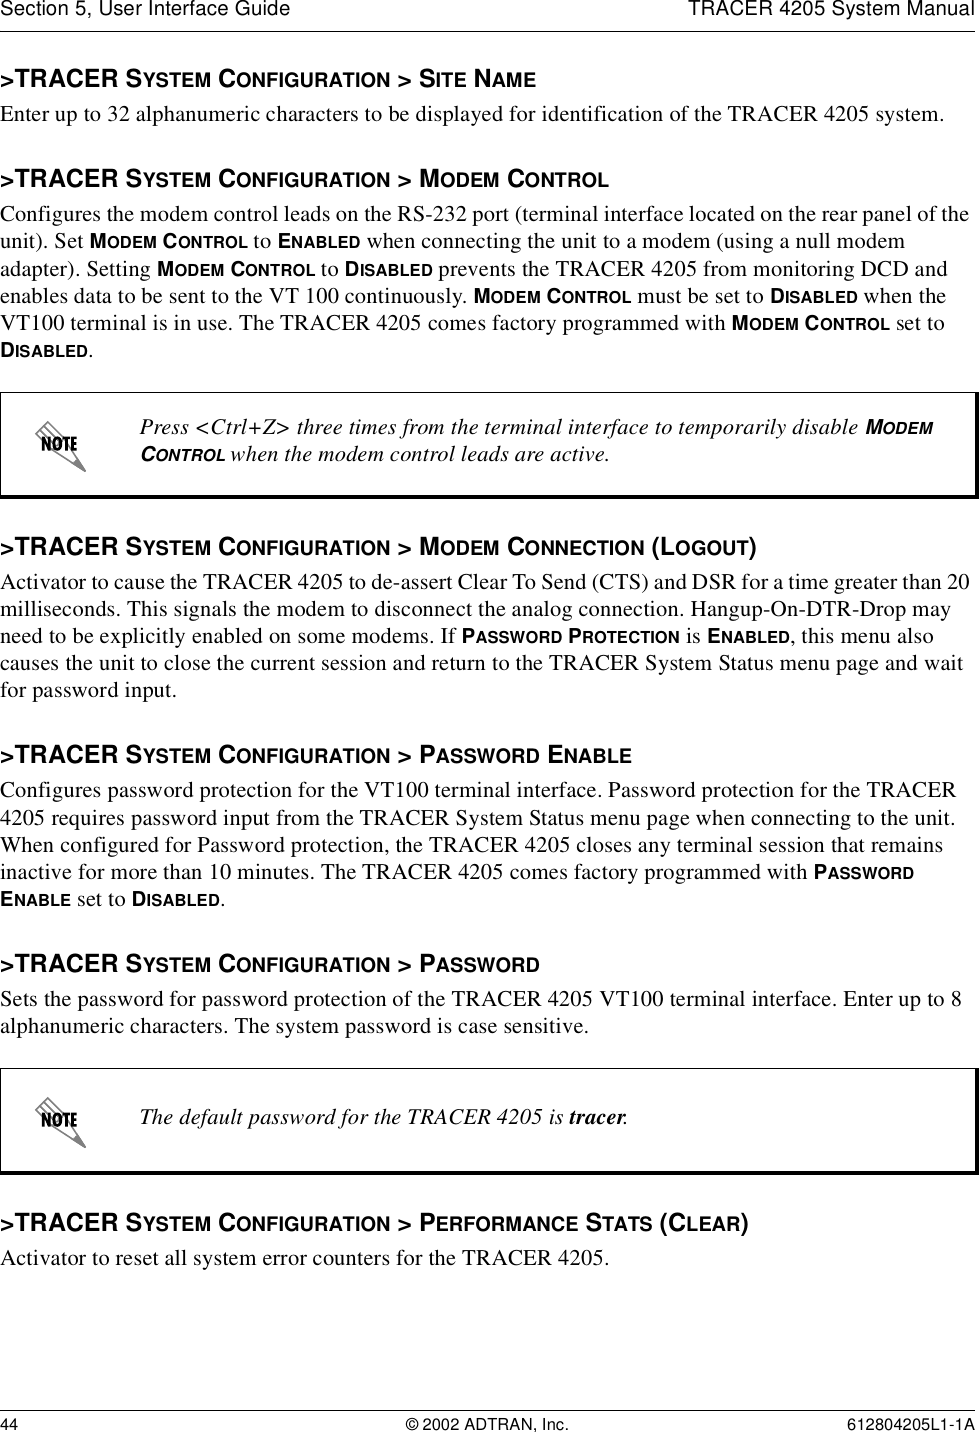 Section 5, User Interface Guide TRACER 4205 System Manual44 © 2002 ADTRAN, Inc. 612804205L1-1A&gt;TRACER SYSTEM CONFIGURATION &gt; SITE NAMEEnter up to 32 alphanumeric characters to be displayed for identification of the TRACER 4205 system. &gt;TRACER SYSTEM CONFIGURATION &gt; MODEM CONTROLConfigures the modem control leads on the RS-232 port (terminal interface located on the rear panel of the unit). Set MODEM CONTROL to ENABLED when connecting the unit to a modem (using a null modem adapter). Setting MODEM CONTROL to DISABLED prevents the TRACER 4205 from monitoring DCD and enables data to be sent to the VT 100 continuously. MODEM CONTROL must be set to DISABLED when the VT100 terminal is in use. The TRACER 4205 comes factory programmed with MODEM CONTROL set to DISABLED.&gt;TRACER SYSTEM CONFIGURATION &gt; MODEM CONNECTION (LOGOUT)Activator to cause the TRACER 4205 to de-assert Clear To Send (CTS) and DSR for a time greater than 20 milliseconds. This signals the modem to disconnect the analog connection. Hangup-On-DTR-Drop may need to be explicitly enabled on some modems. If PASSWORD PROTECTION is ENABLED, this menu also causes the unit to close the current session and return to the TRACER System Status menu page and wait for password input.&gt;TRACER SYSTEM CONFIGURATION &gt; PASSWORD ENABLEConfigures password protection for the VT100 terminal interface. Password protection for the TRACER 4205 requires password input from the TRACER System Status menu page when connecting to the unit. When configured for Password protection, the TRACER 4205 closes any terminal session that remains inactive for more than 10 minutes. The TRACER 4205 comes factory programmed with PASSWORD ENABLE set to DISABLED. &gt;TRACER SYSTEM CONFIGURATION &gt; PASSWORDSets the password for password protection of the TRACER 4205 VT100 terminal interface. Enter up to 8 alphanumeric characters. The system password is case sensitive.&gt;TRACER SYSTEM CONFIGURATION &gt; PERFORMANCE STATS (CLEAR)Activator to reset all system error counters for the TRACER 4205.Press &lt;Ctrl+Z&gt; three times from the terminal interface to temporarily disable MODEM CONTROL when the modem control leads are active.The default password for the TRACER 4205 is tracer.